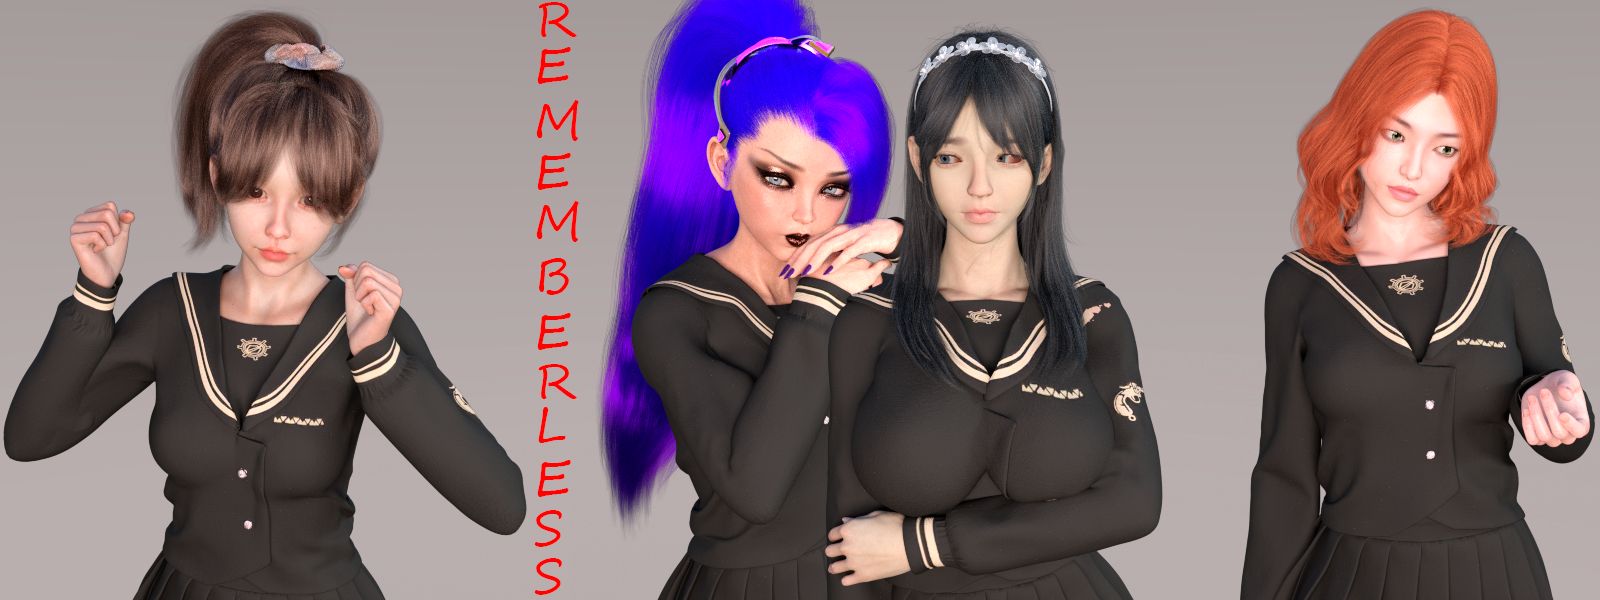 Rememberless Apk Android Adult Game Download (13)